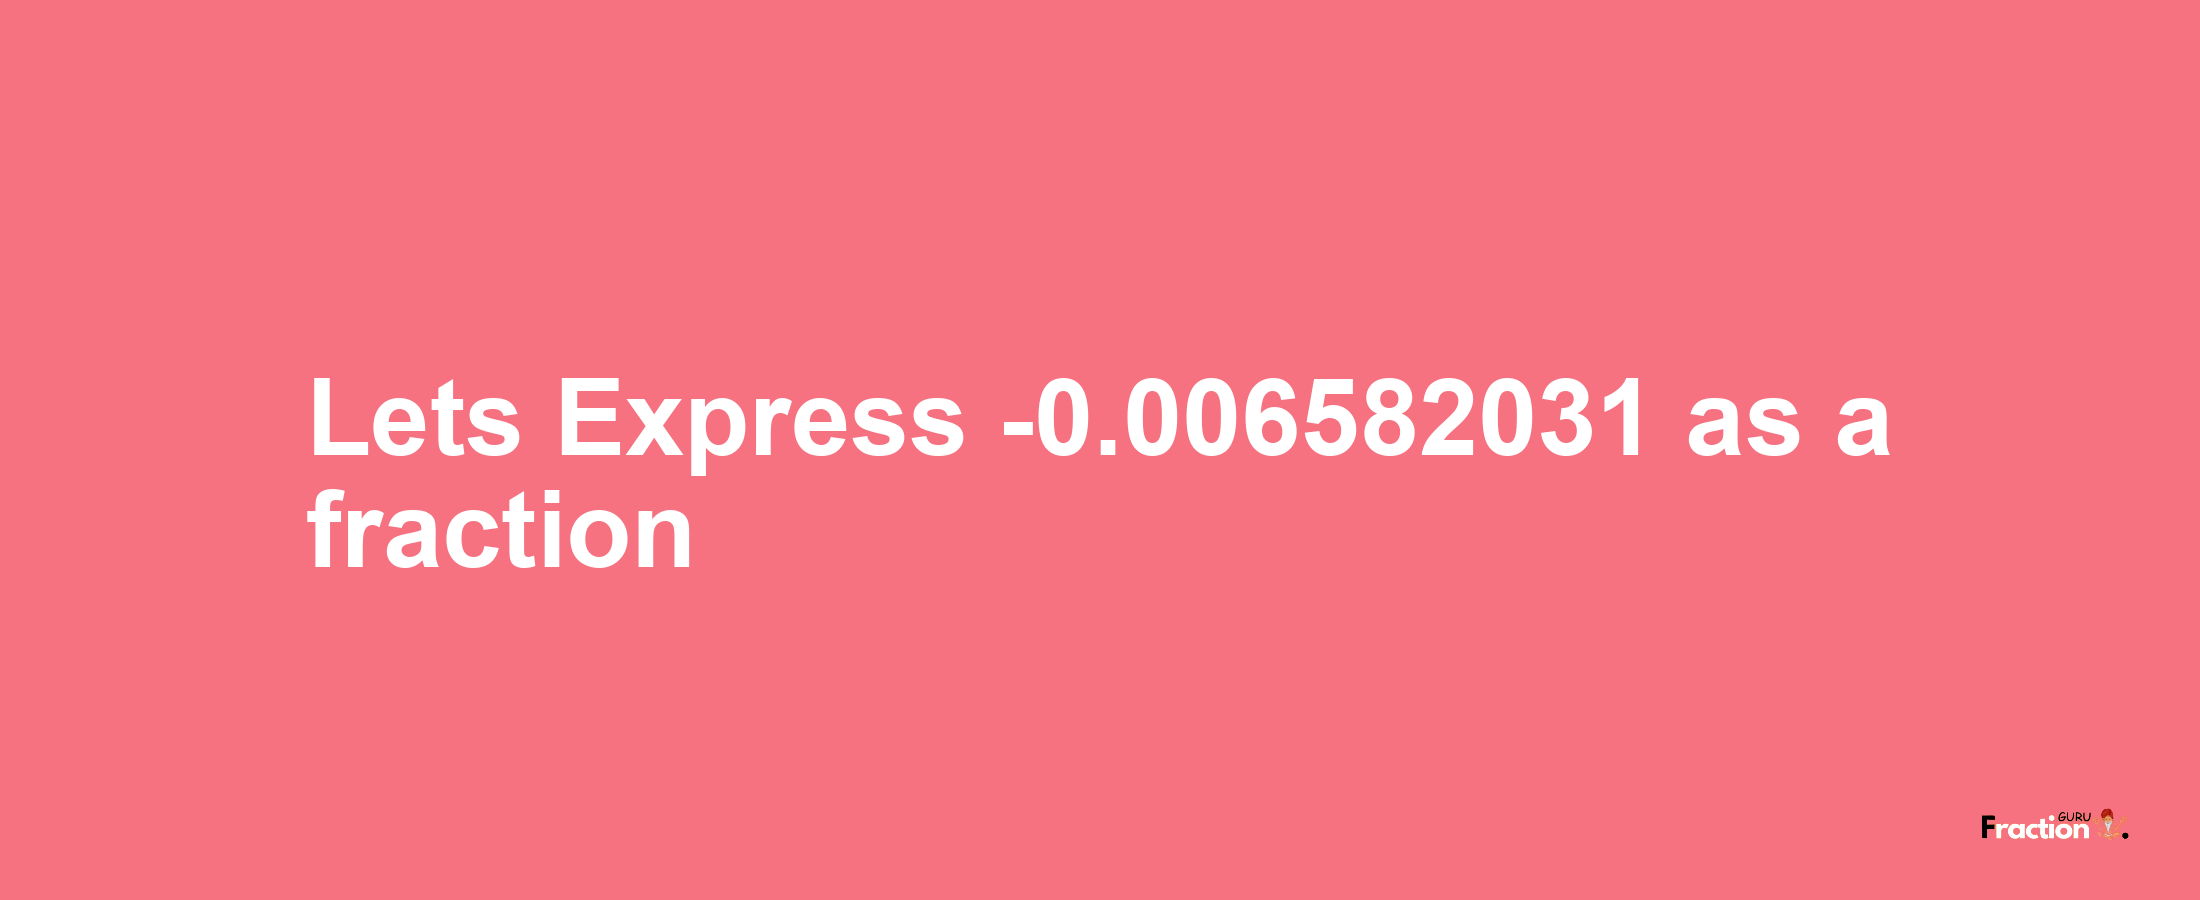 Lets Express -0.006582031 as afraction